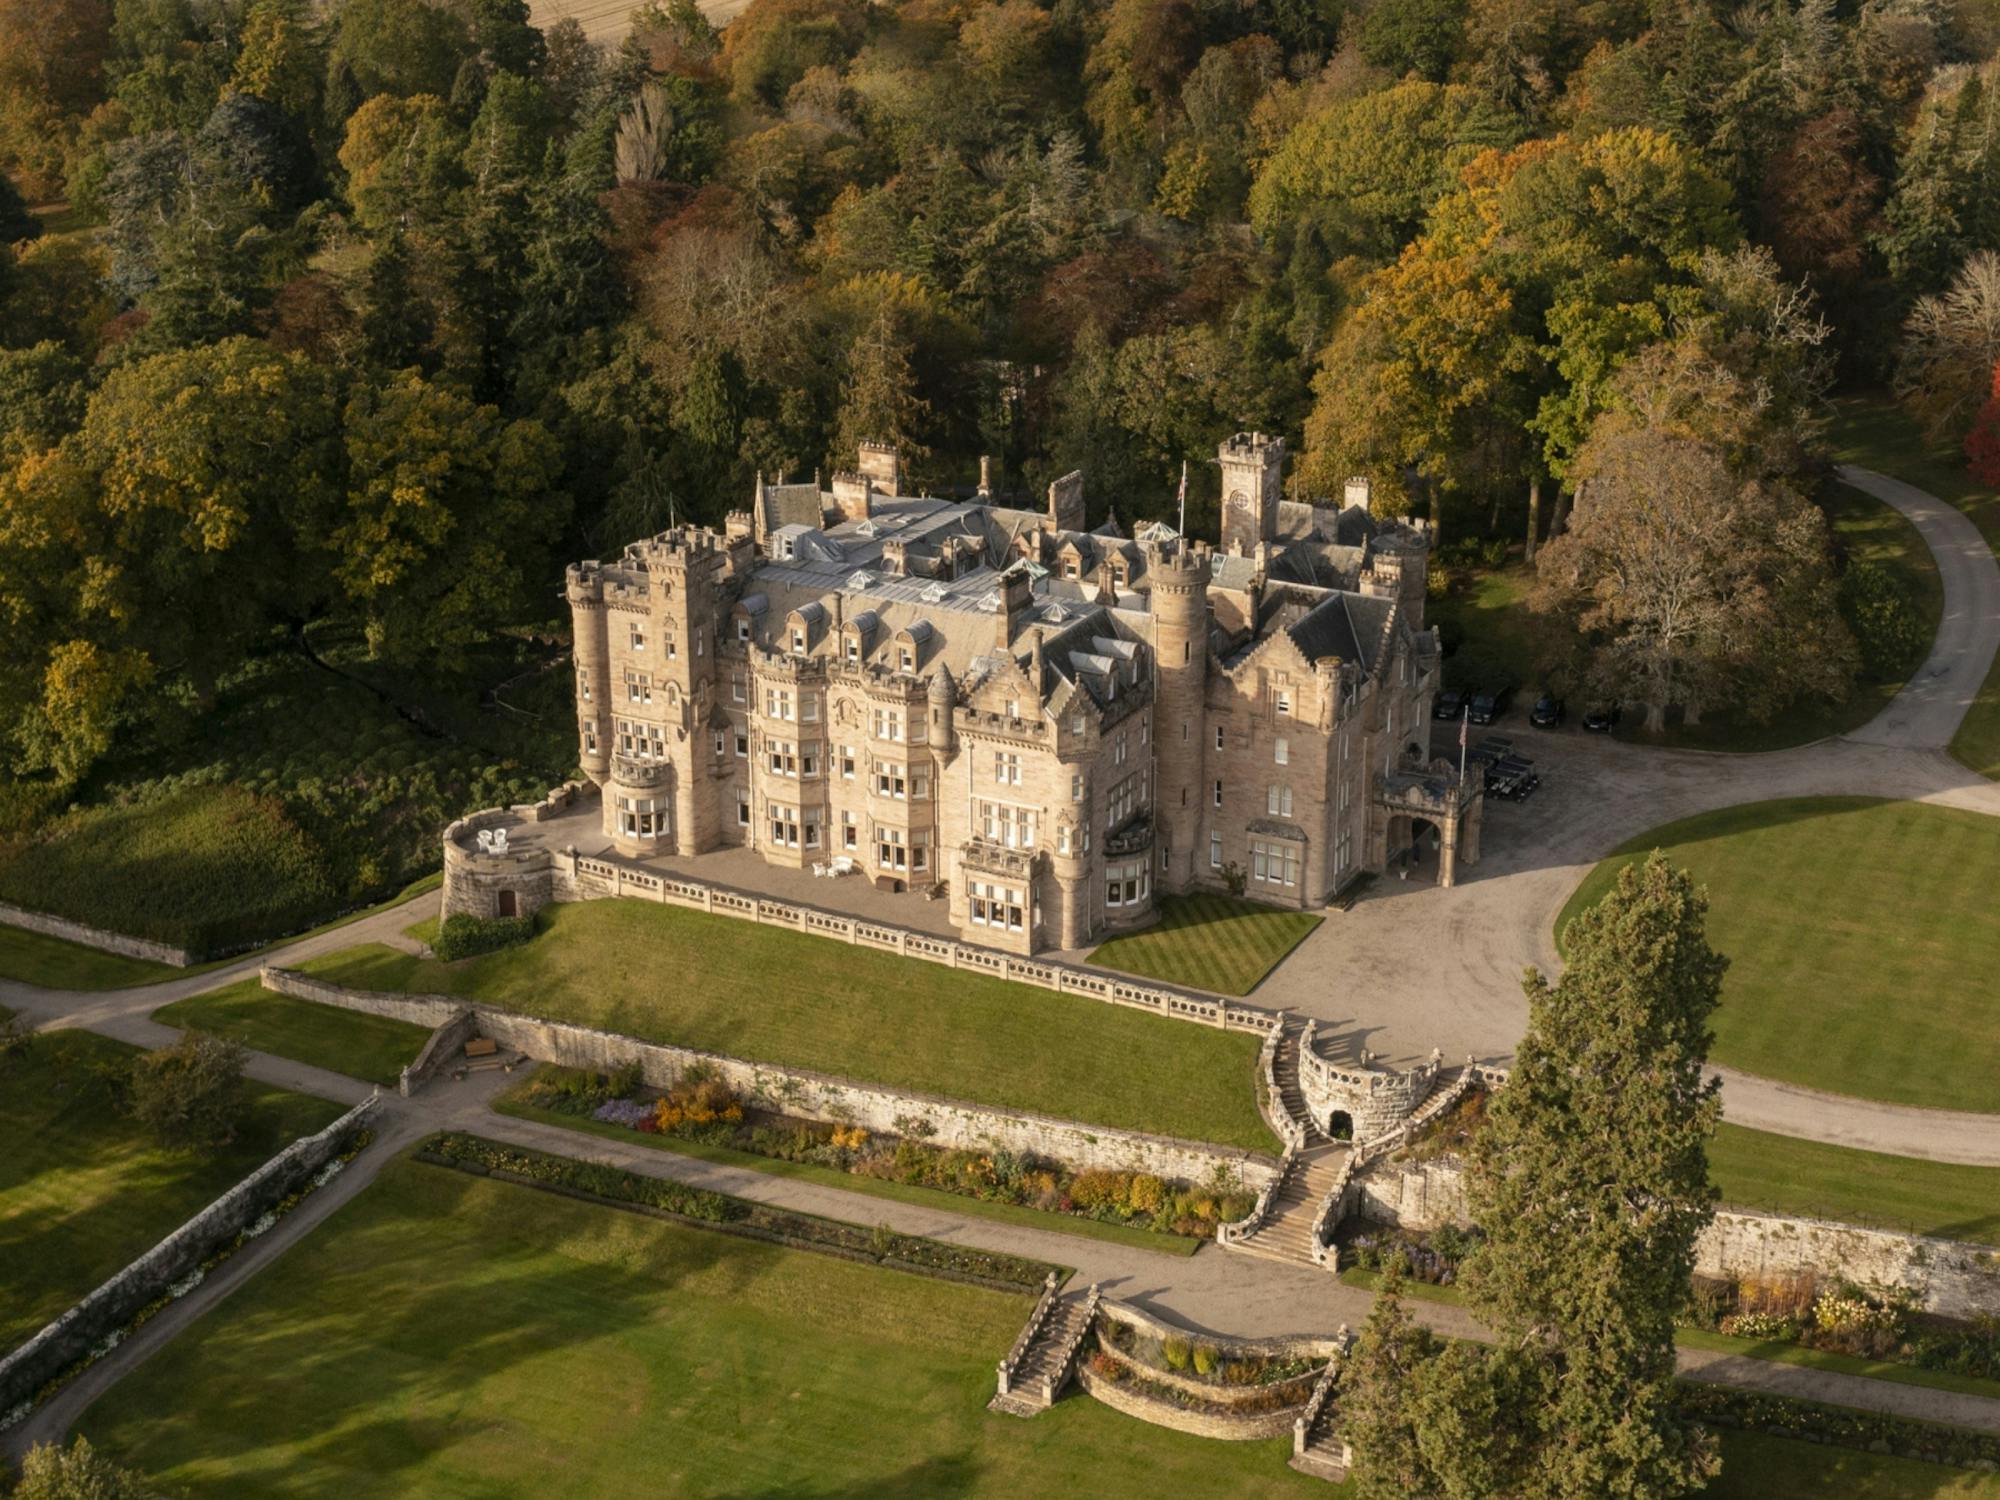 Welcome to Walpole Introducing The Carnegie Club at Skibo Castle, our latest Walpole member 